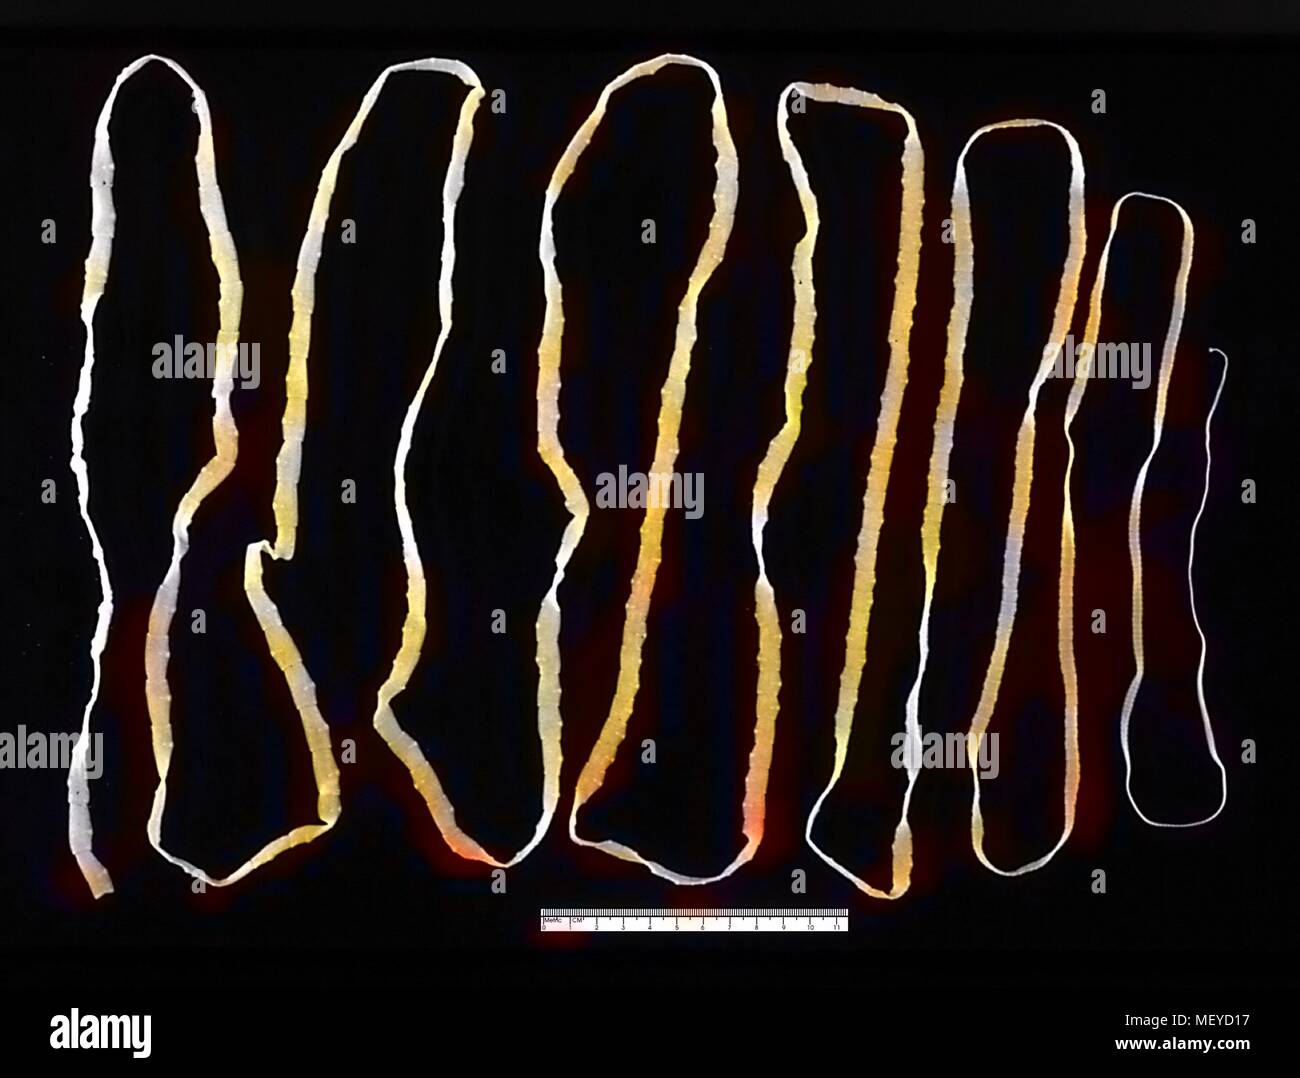 Adult tapeworm (Taenia saginata) in the human intestine, 1986. Image courtesy Centers for Disease Control (CDC). Note: Image has been digitally colorized using a modern process. Colors may not be period-accurate. () Stock Photo